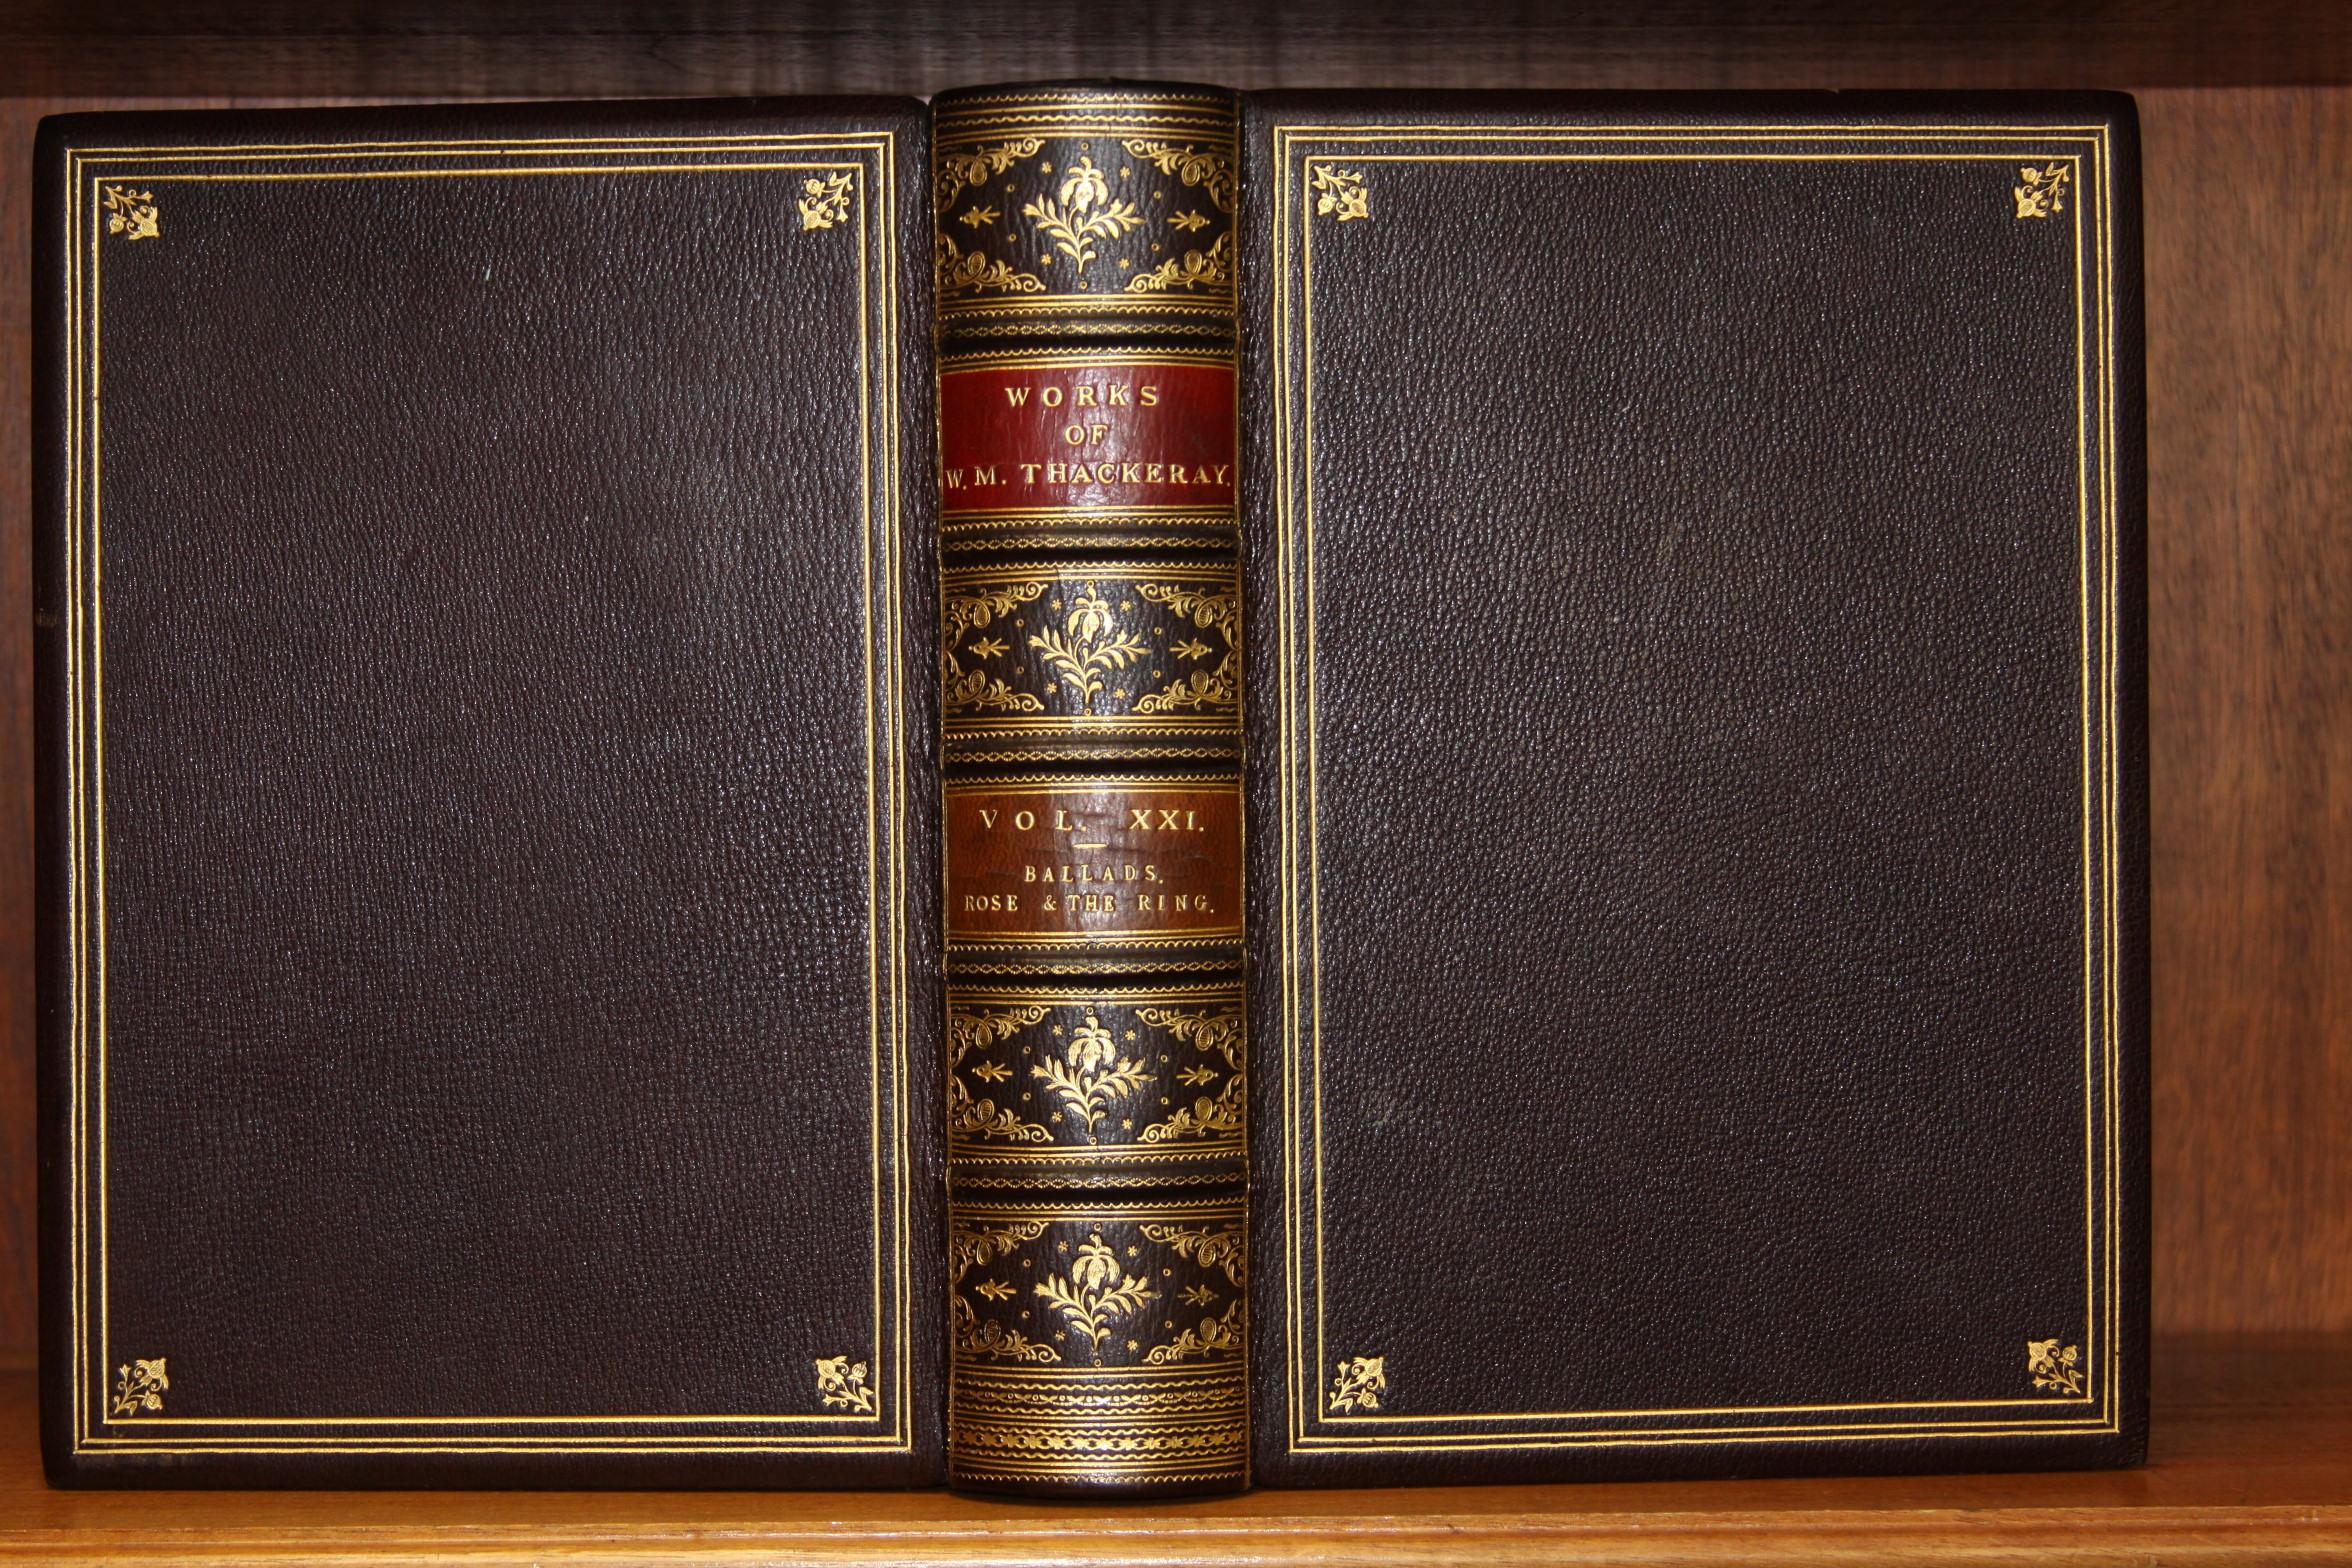 19th Century Books, The Writings of William Makepeace Thackeray, Antiques Leather-Bound Set